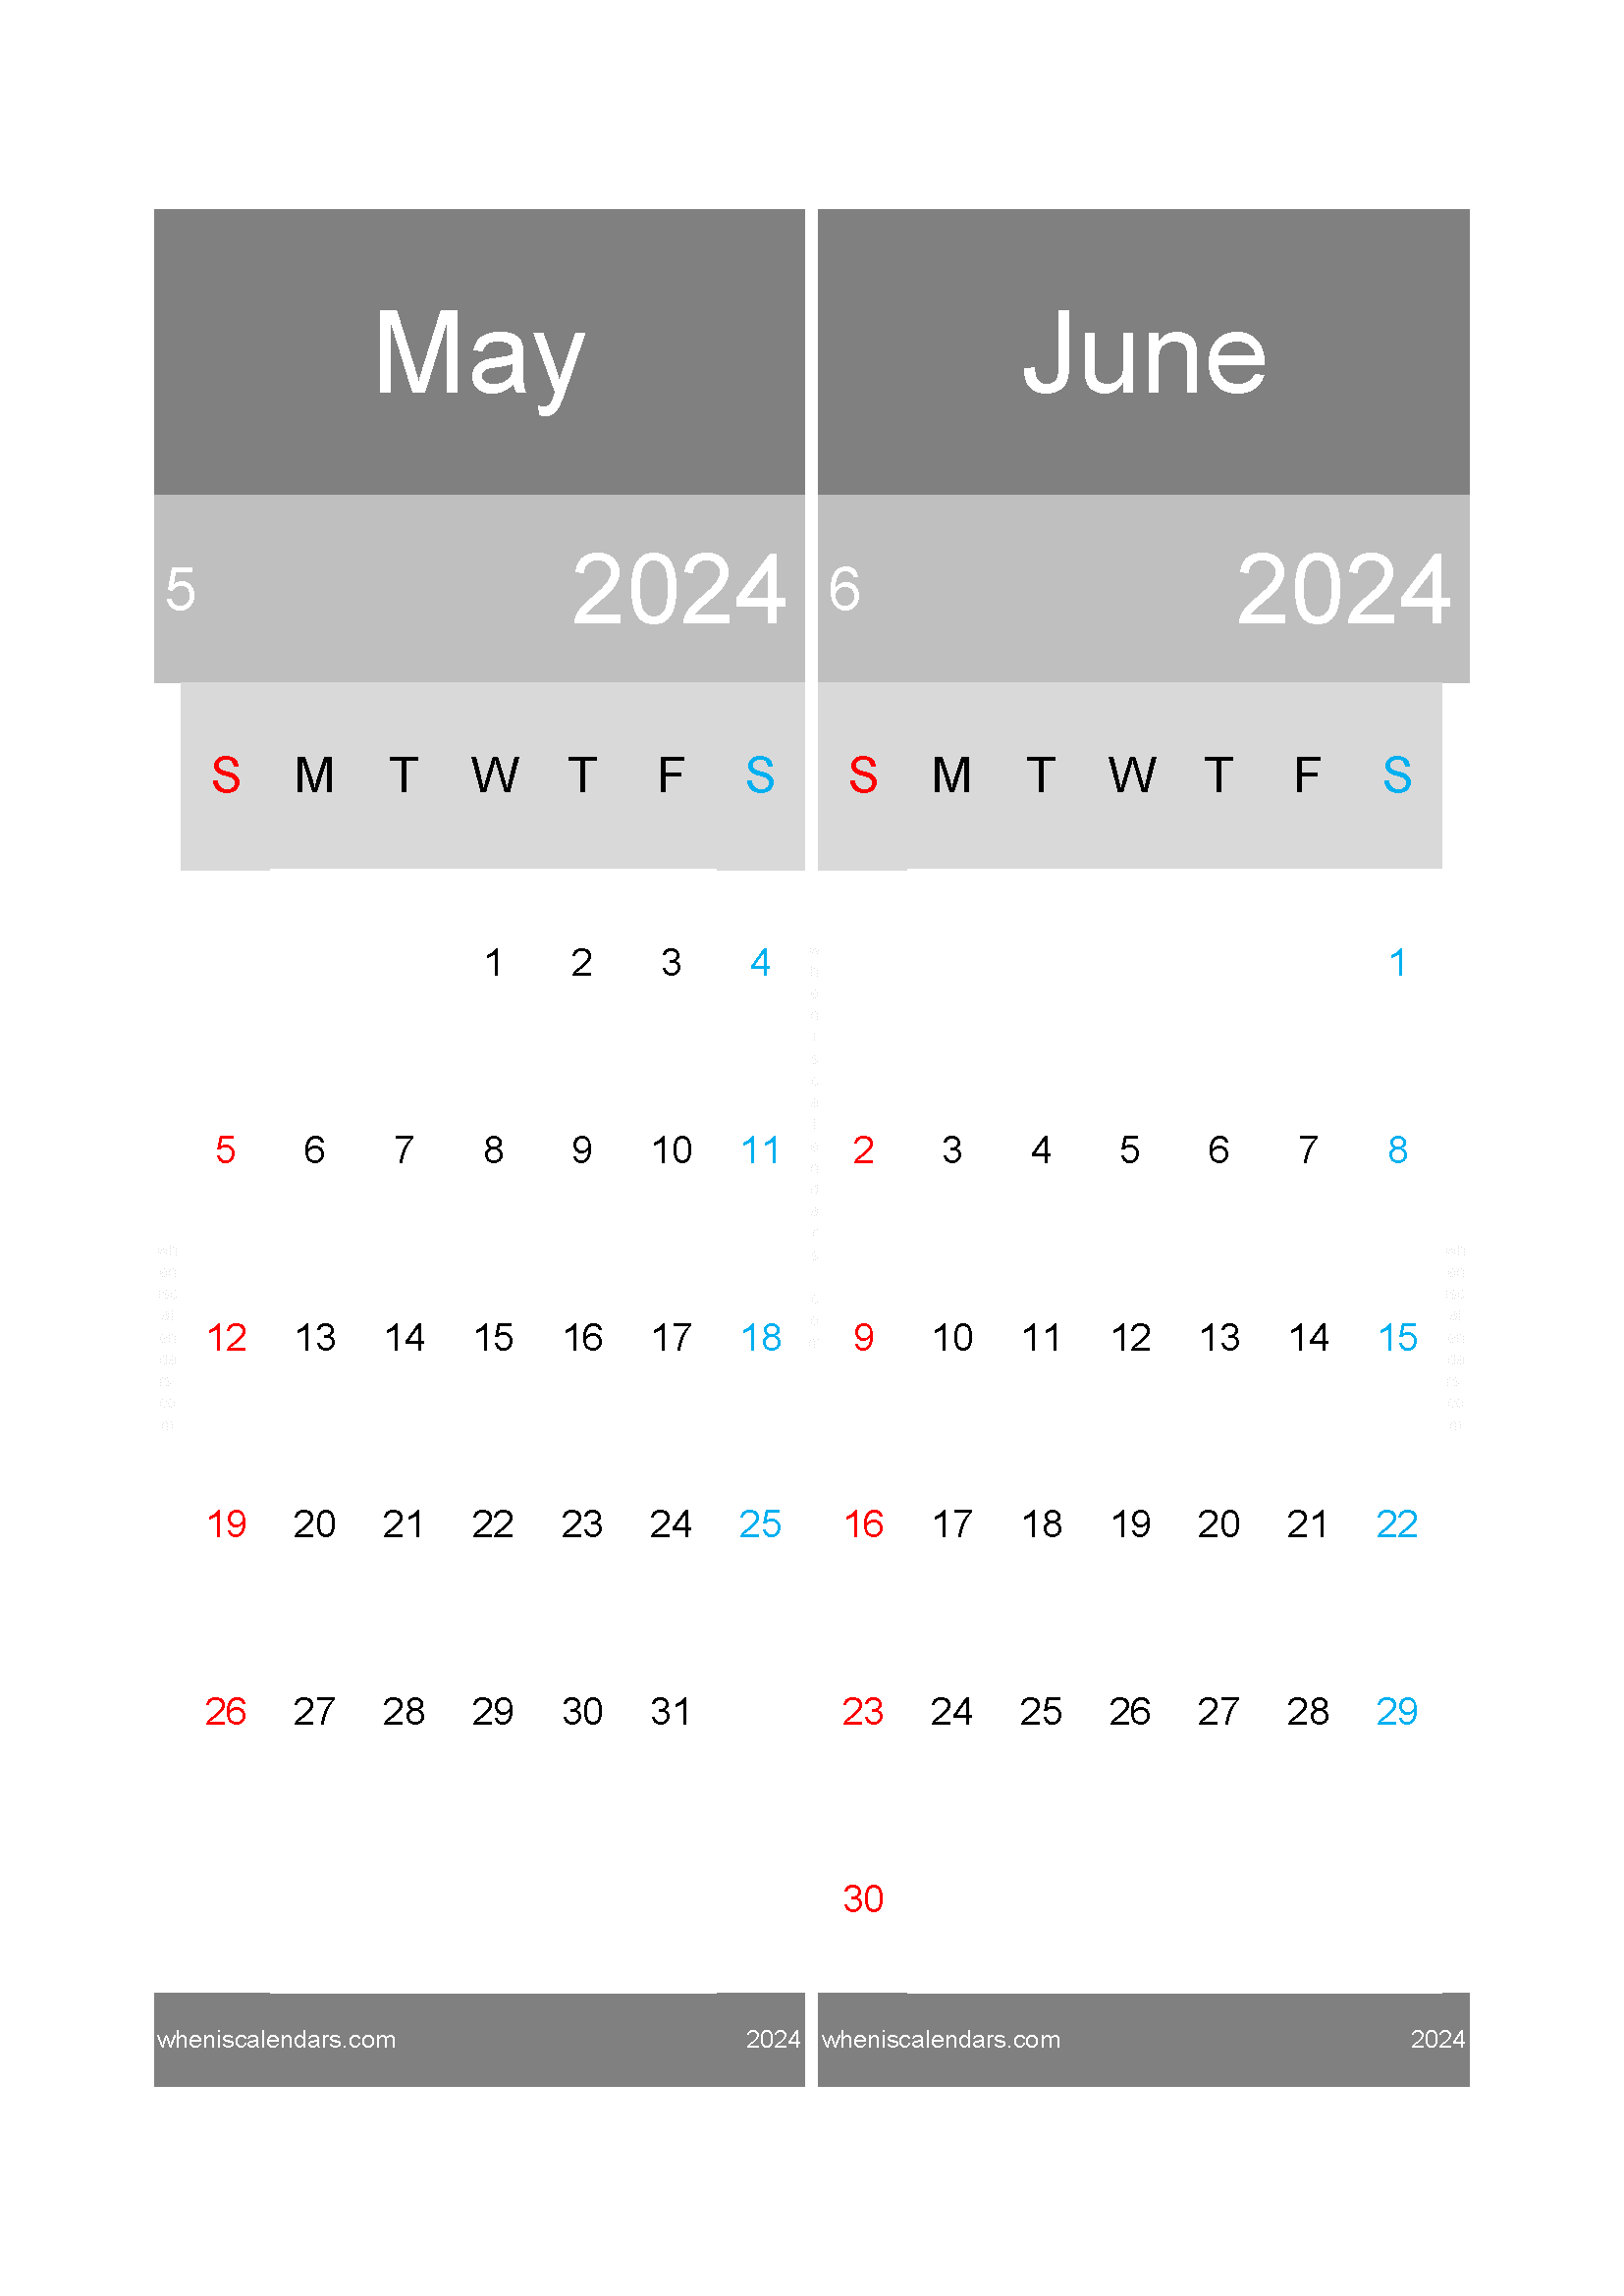 Download May and June calendar 2024 A4 MJ24020